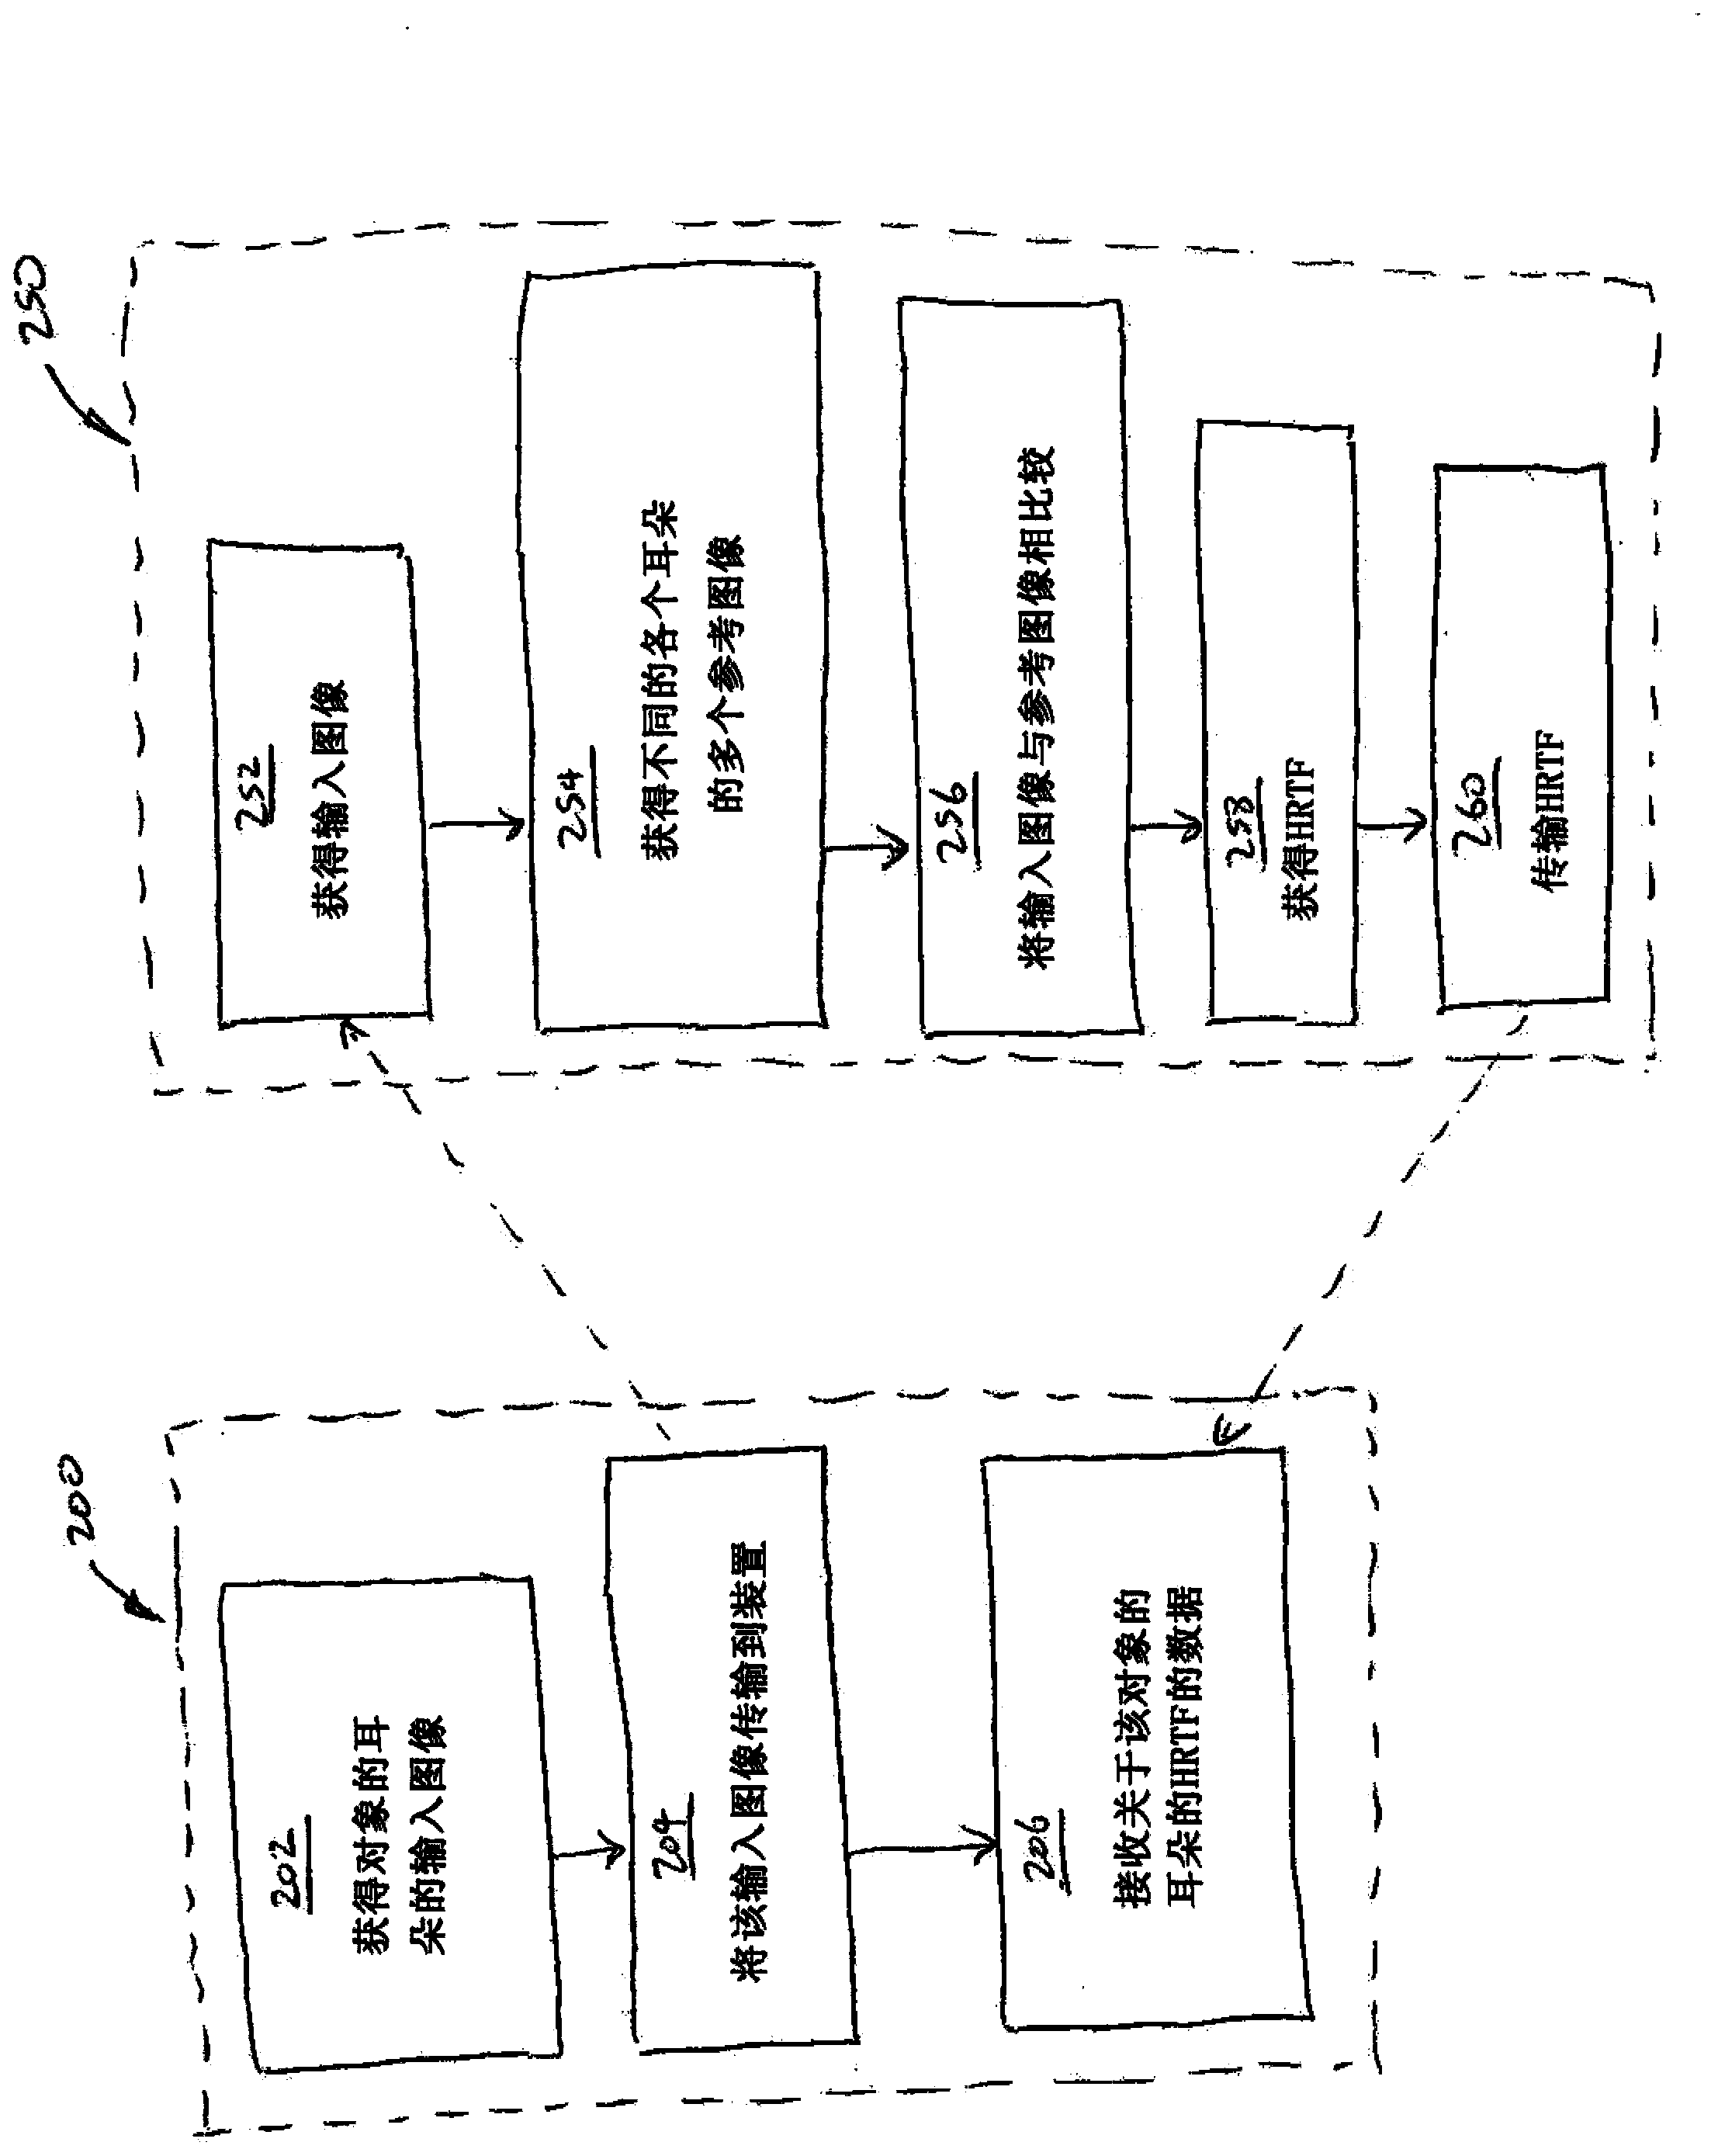 Systems and methods for determining head related transfer functions